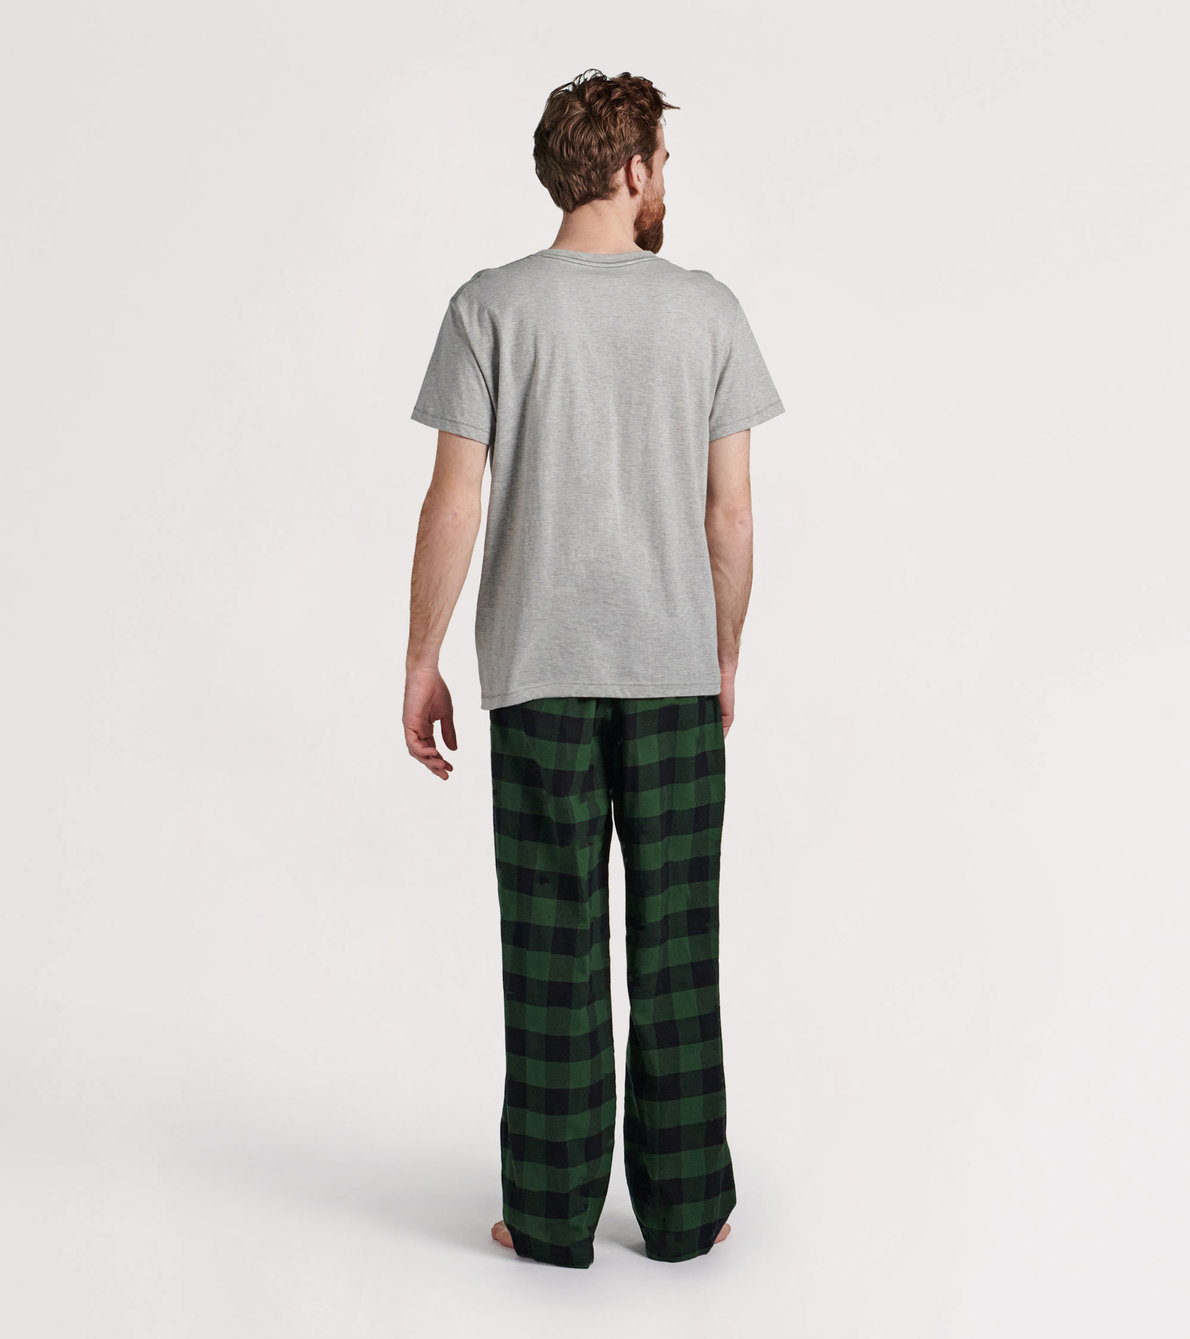 View larger image of Forest Green Plaid Men's Flannel Pajama Pants